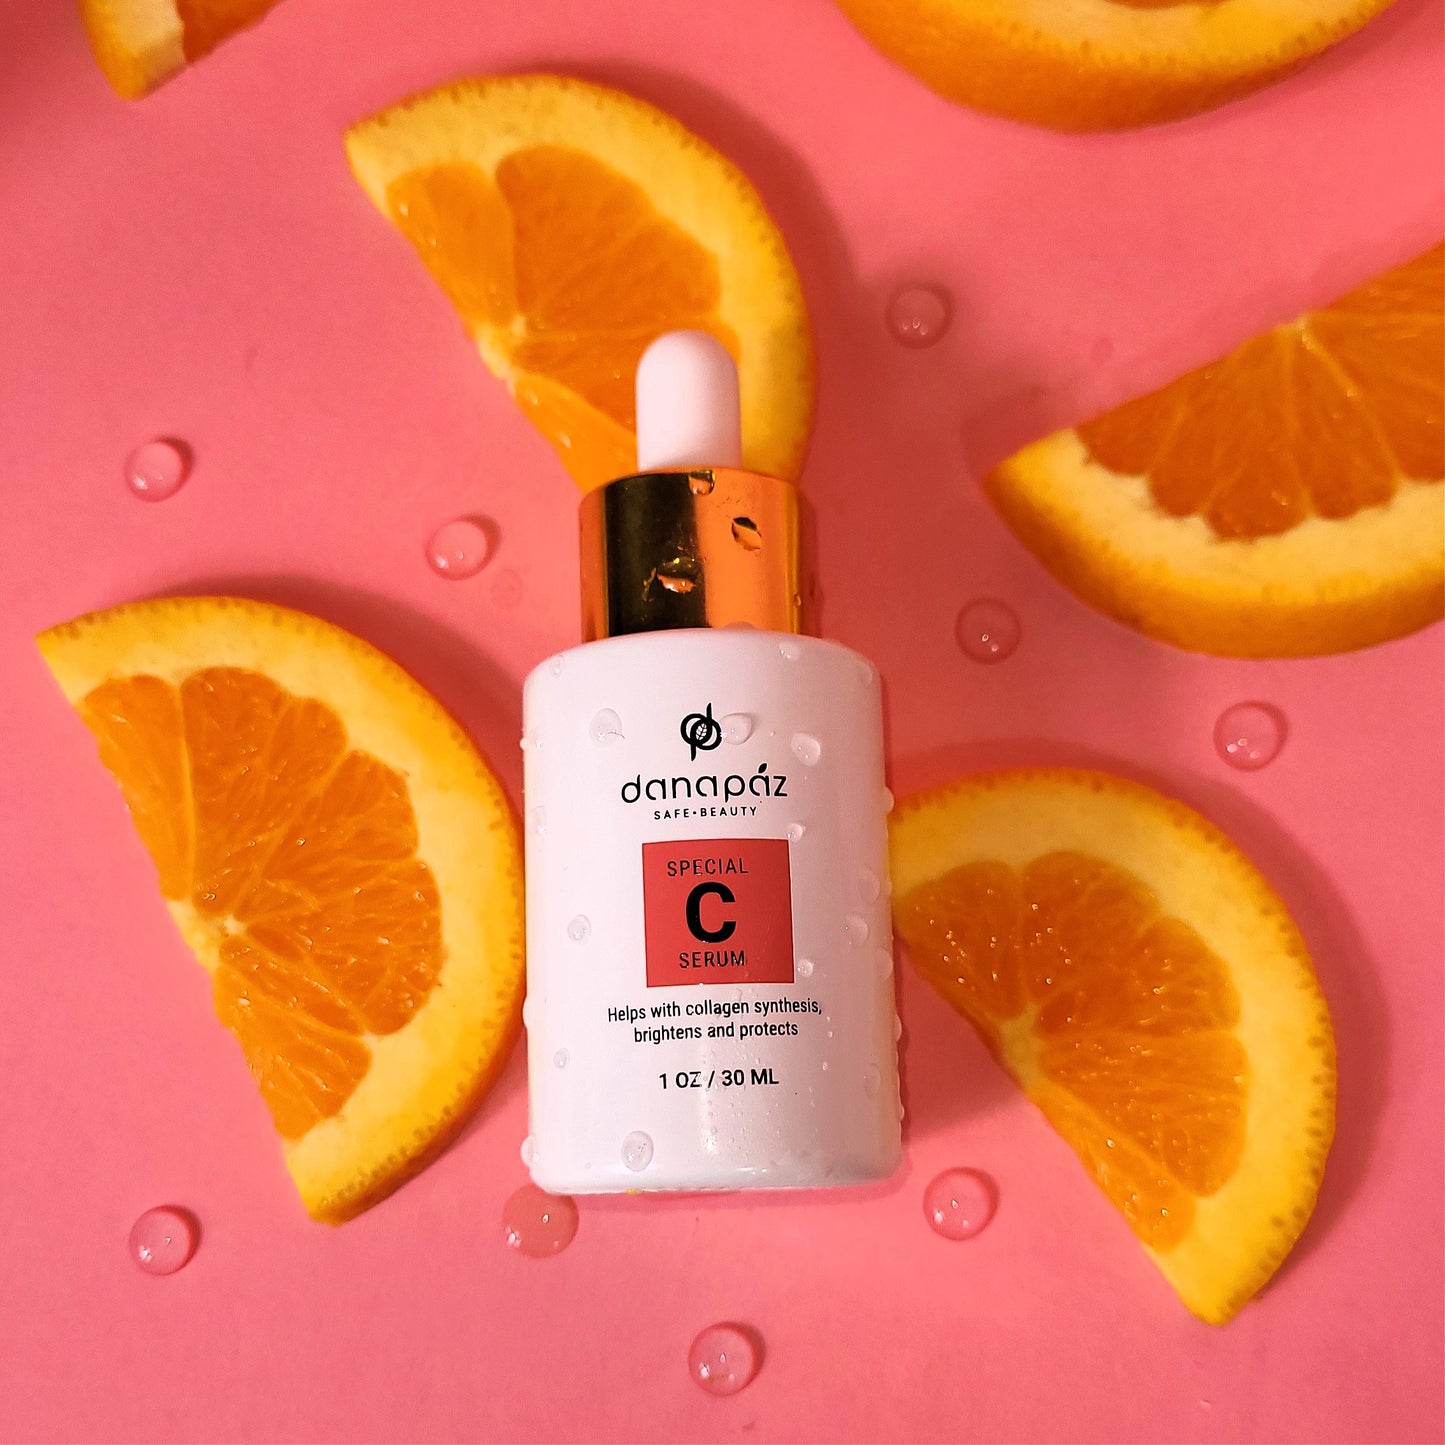 vitamin c serum for skin protection, antioxidant effect. It helps with hormonal imbalances, skin challenges, and stretch marks. Danapaz is a clean botanical based skincare line designed to address sensitive skin